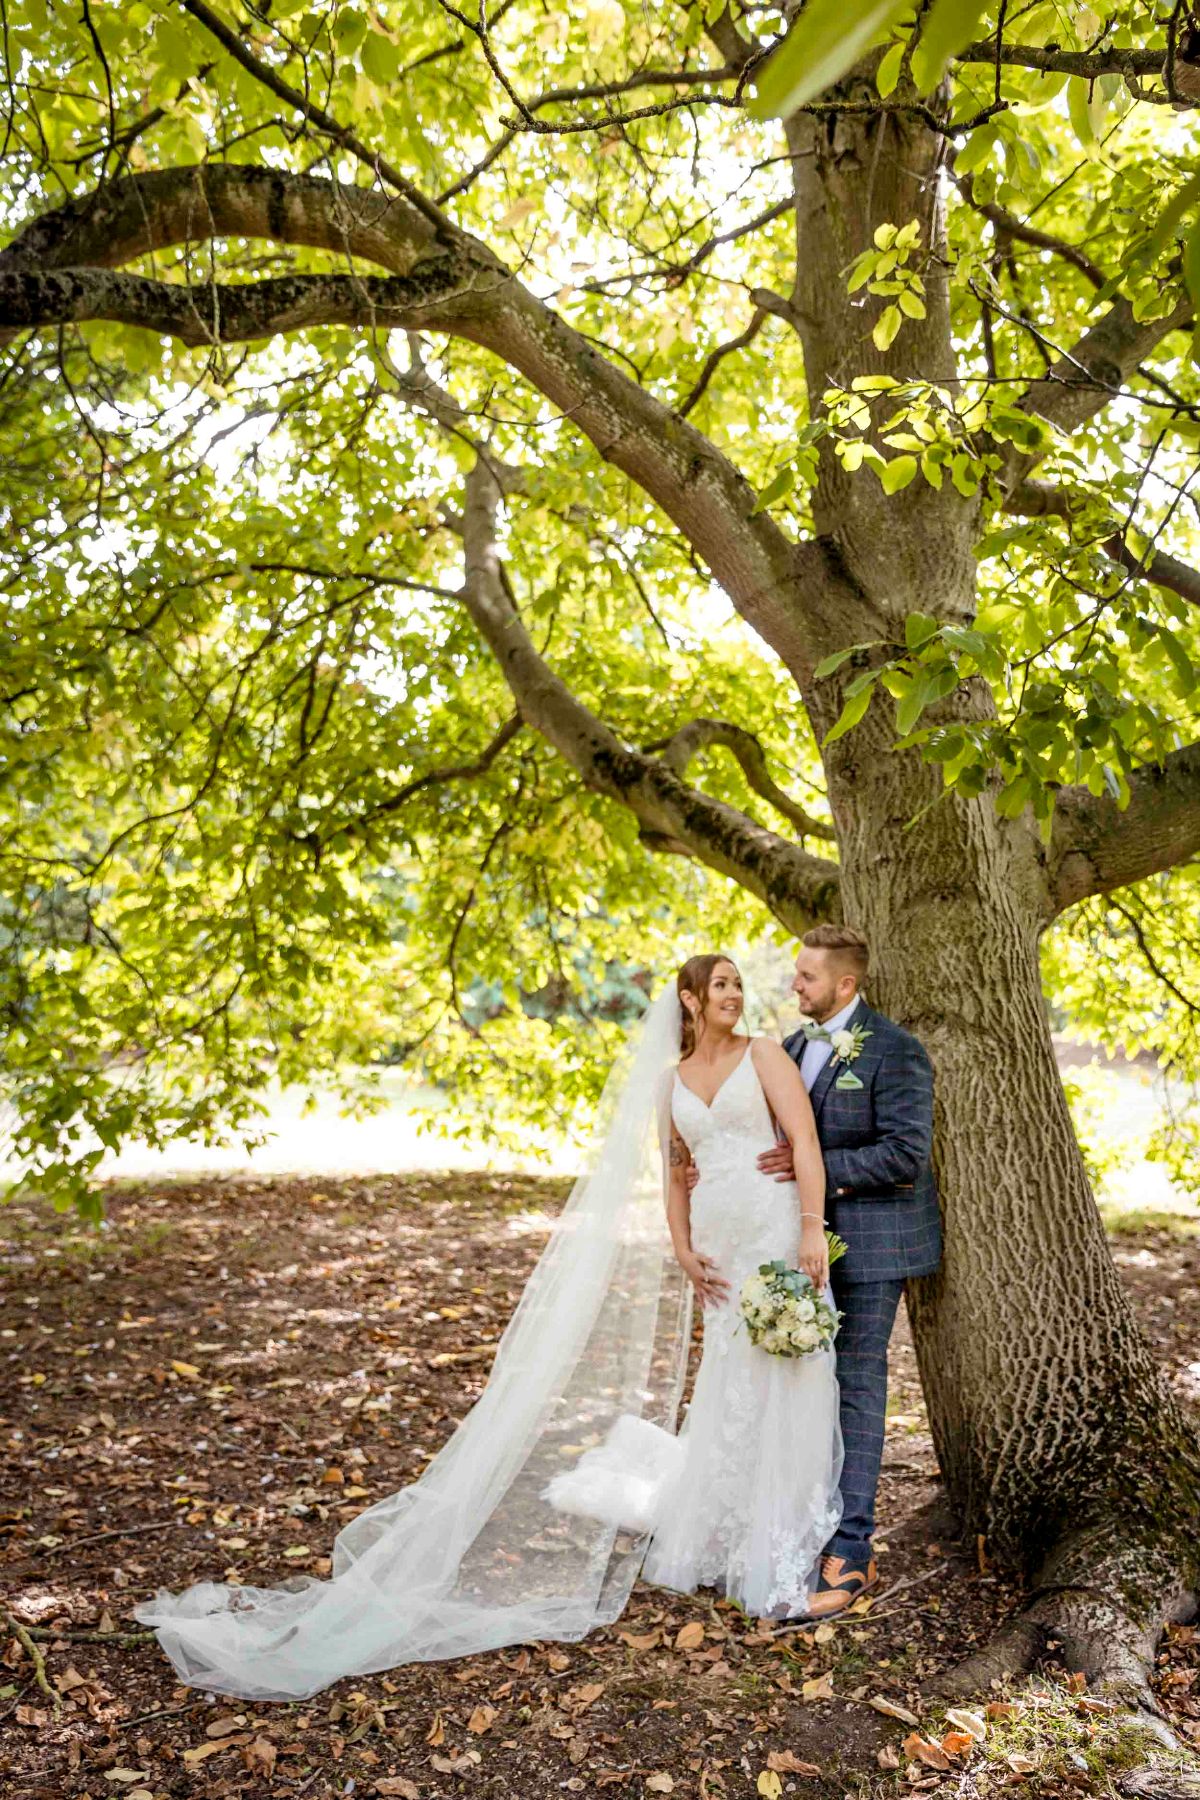 Wedding portrait under a beautiful tree at Glenfield Registry Office Leicester